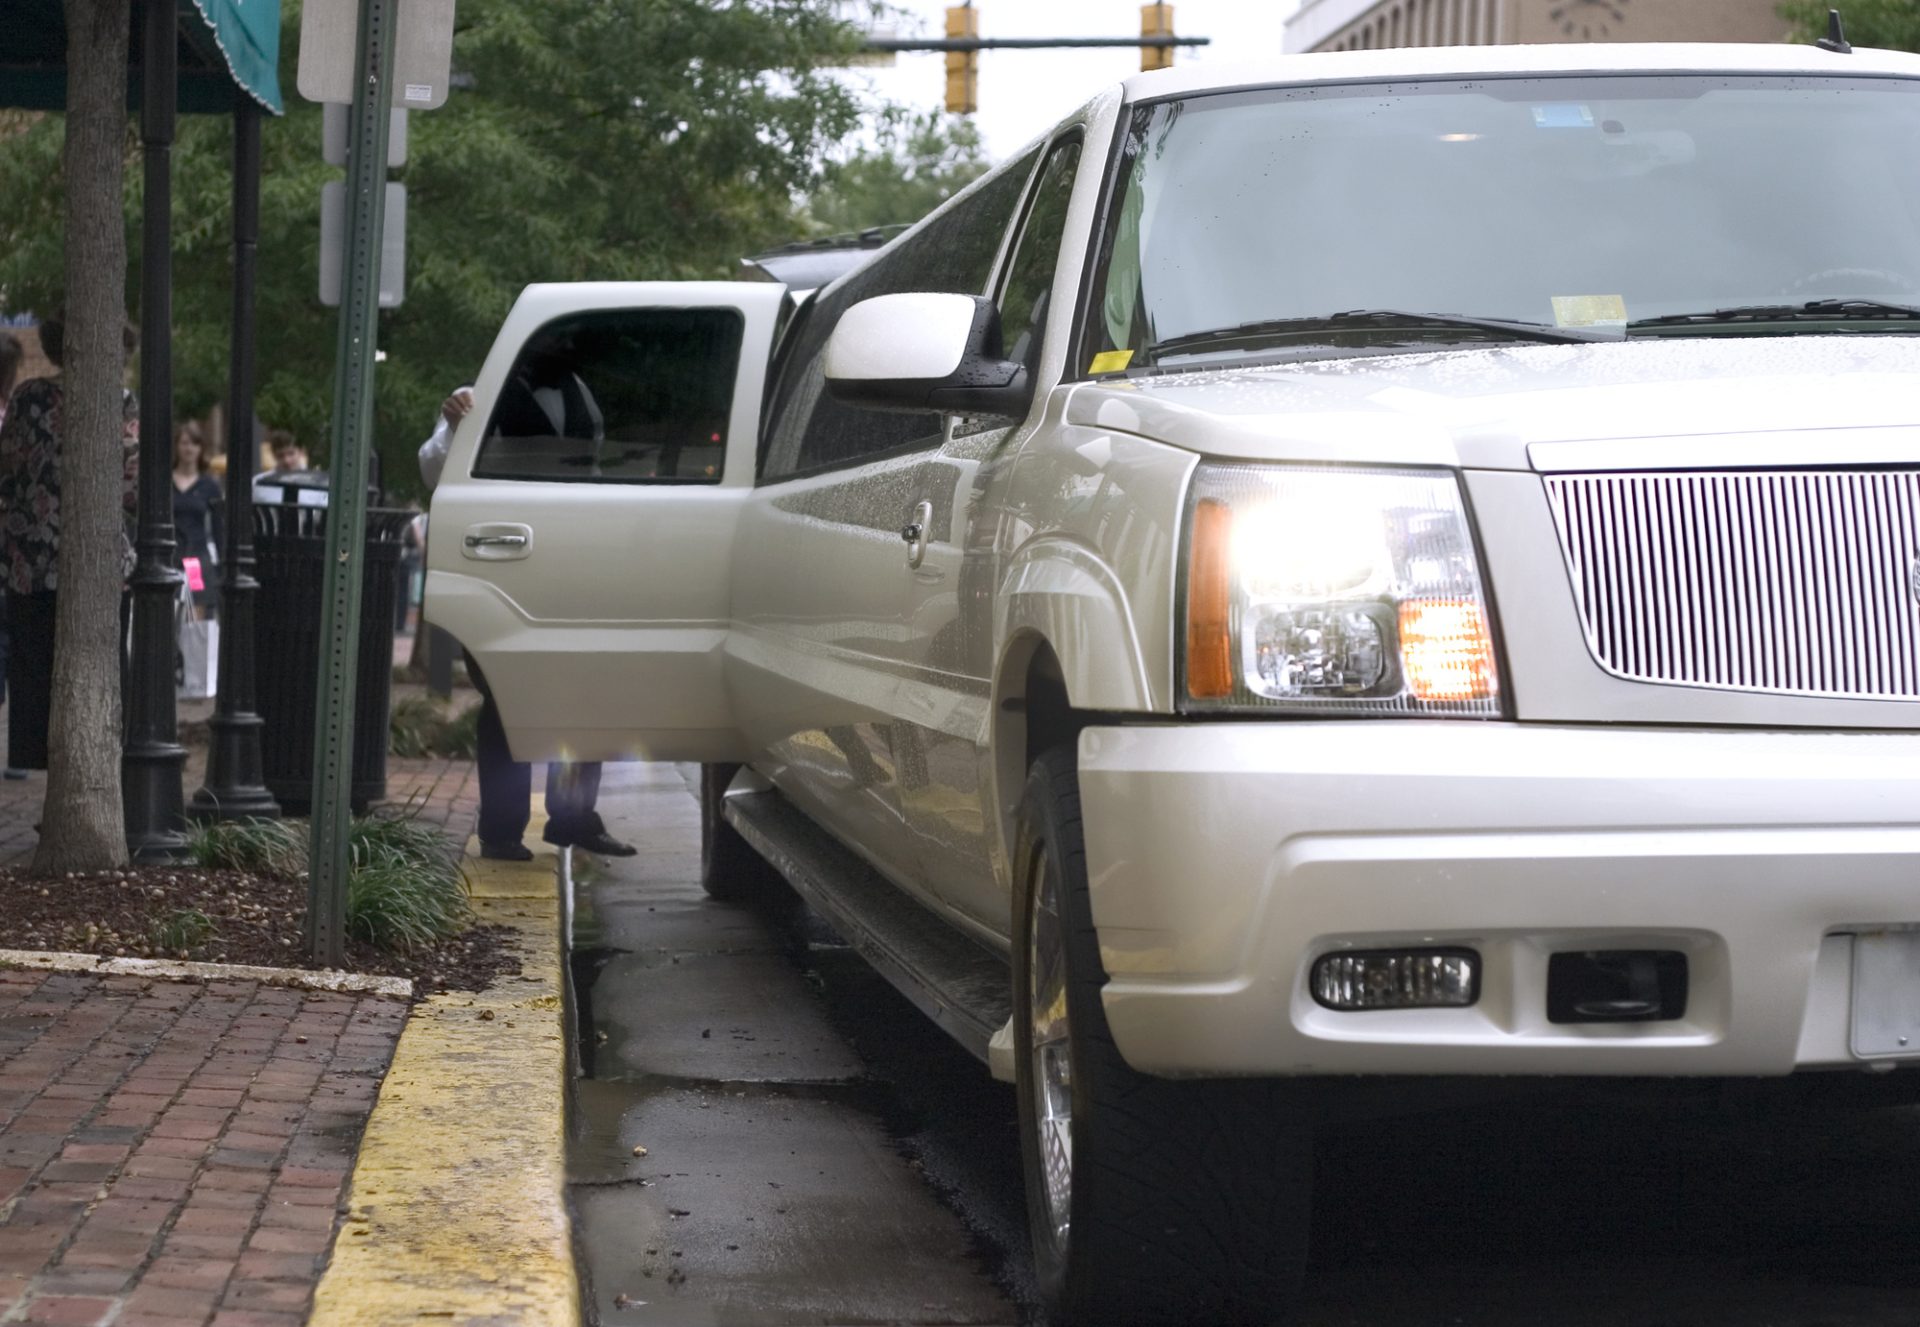 How Much Do Limousines Cost to Rent?